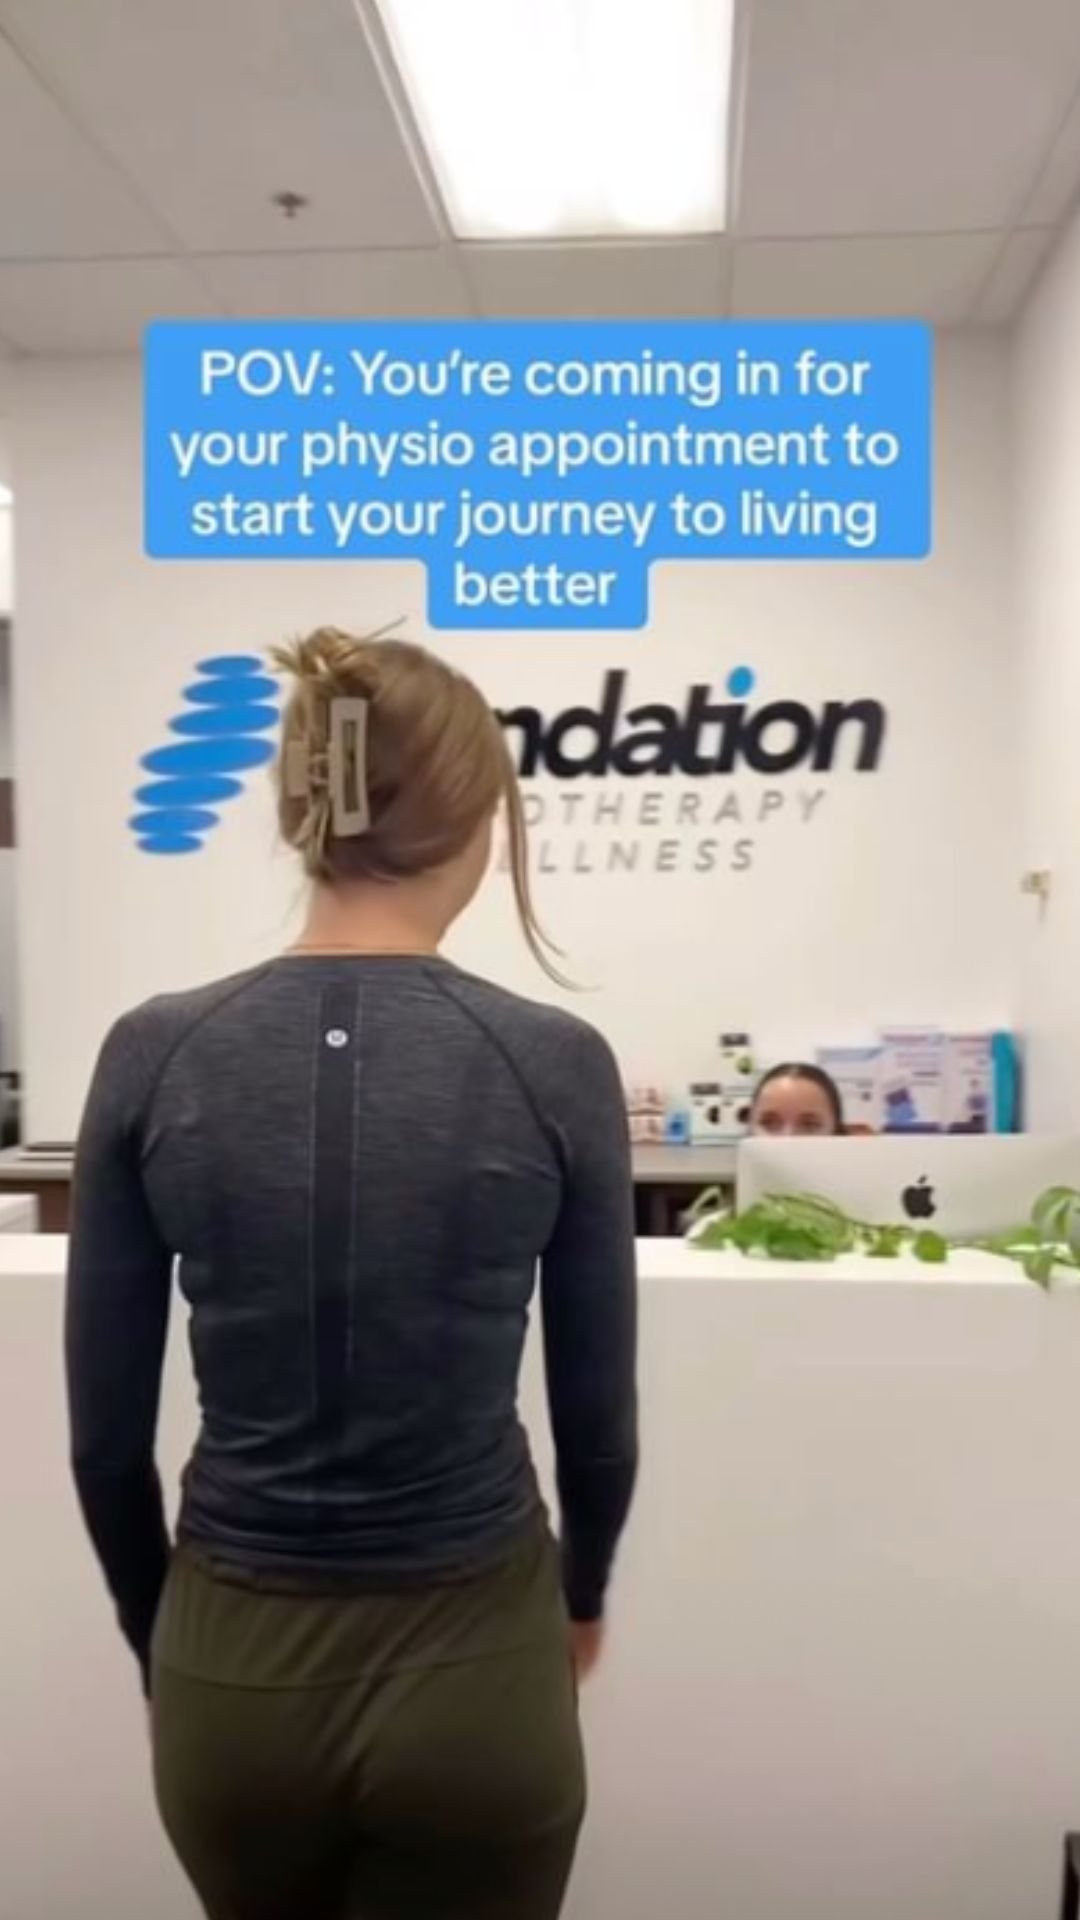 Foundation Physio Patient Experience